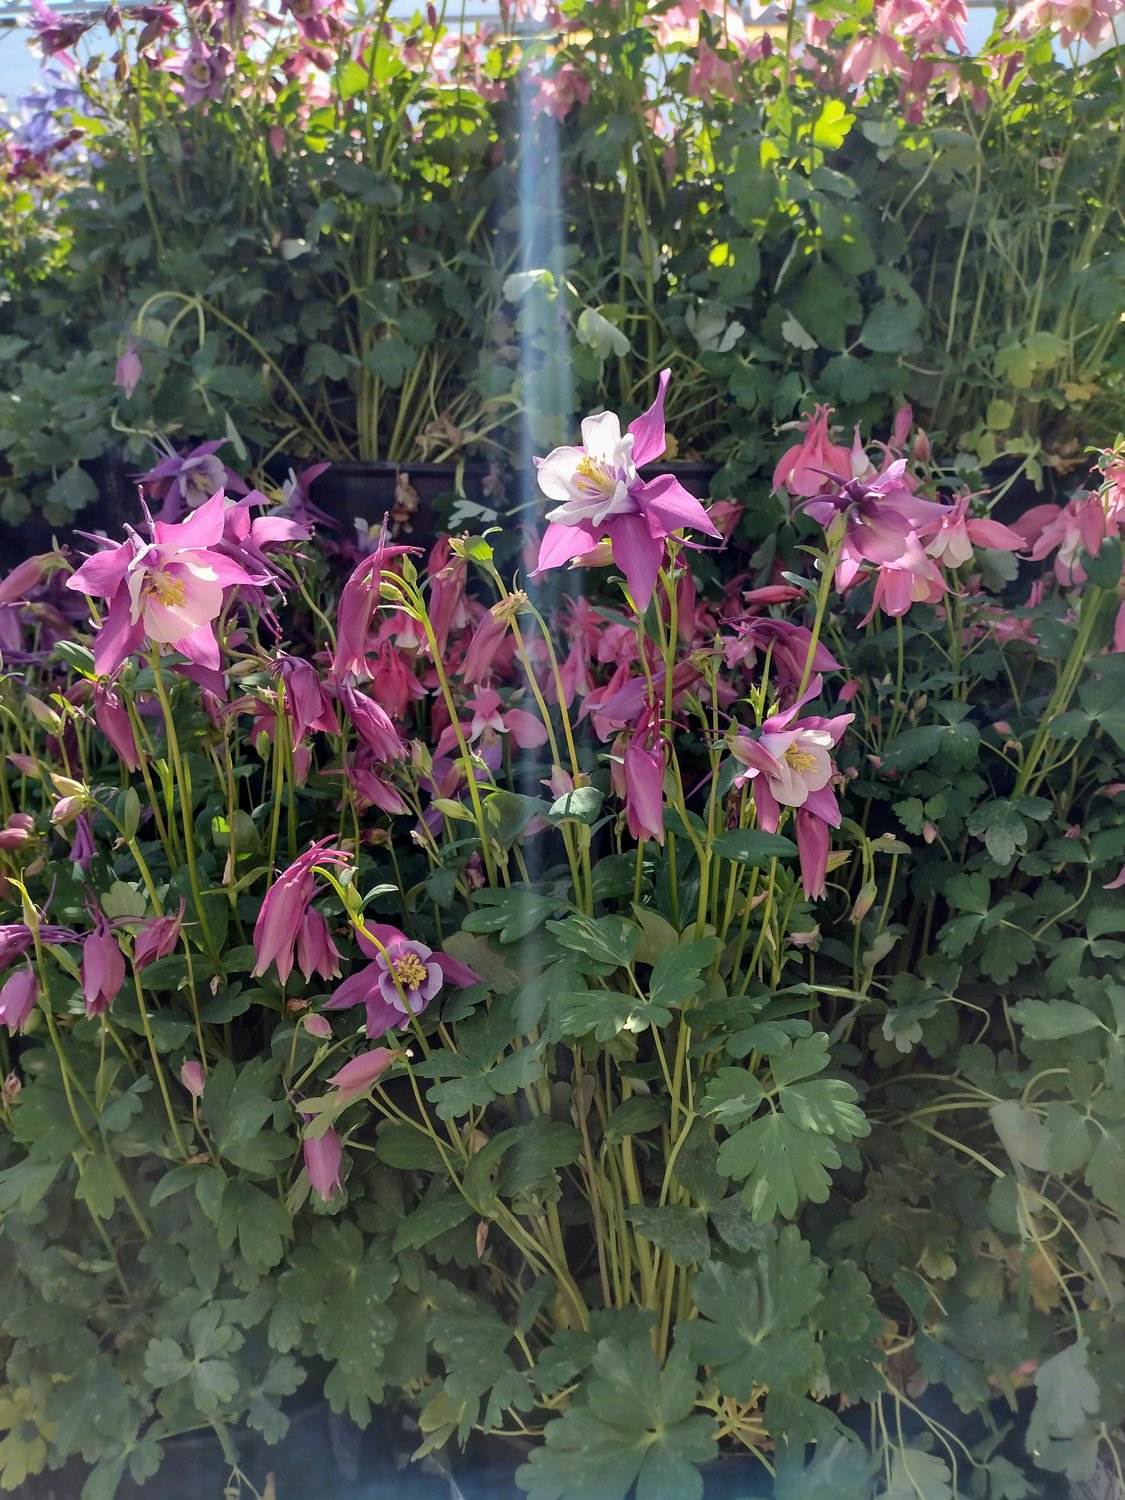 Aquilegia, or columbine, is a great choice for partially shady areas. It comes in a kaleidoscope of colors and is perennial.